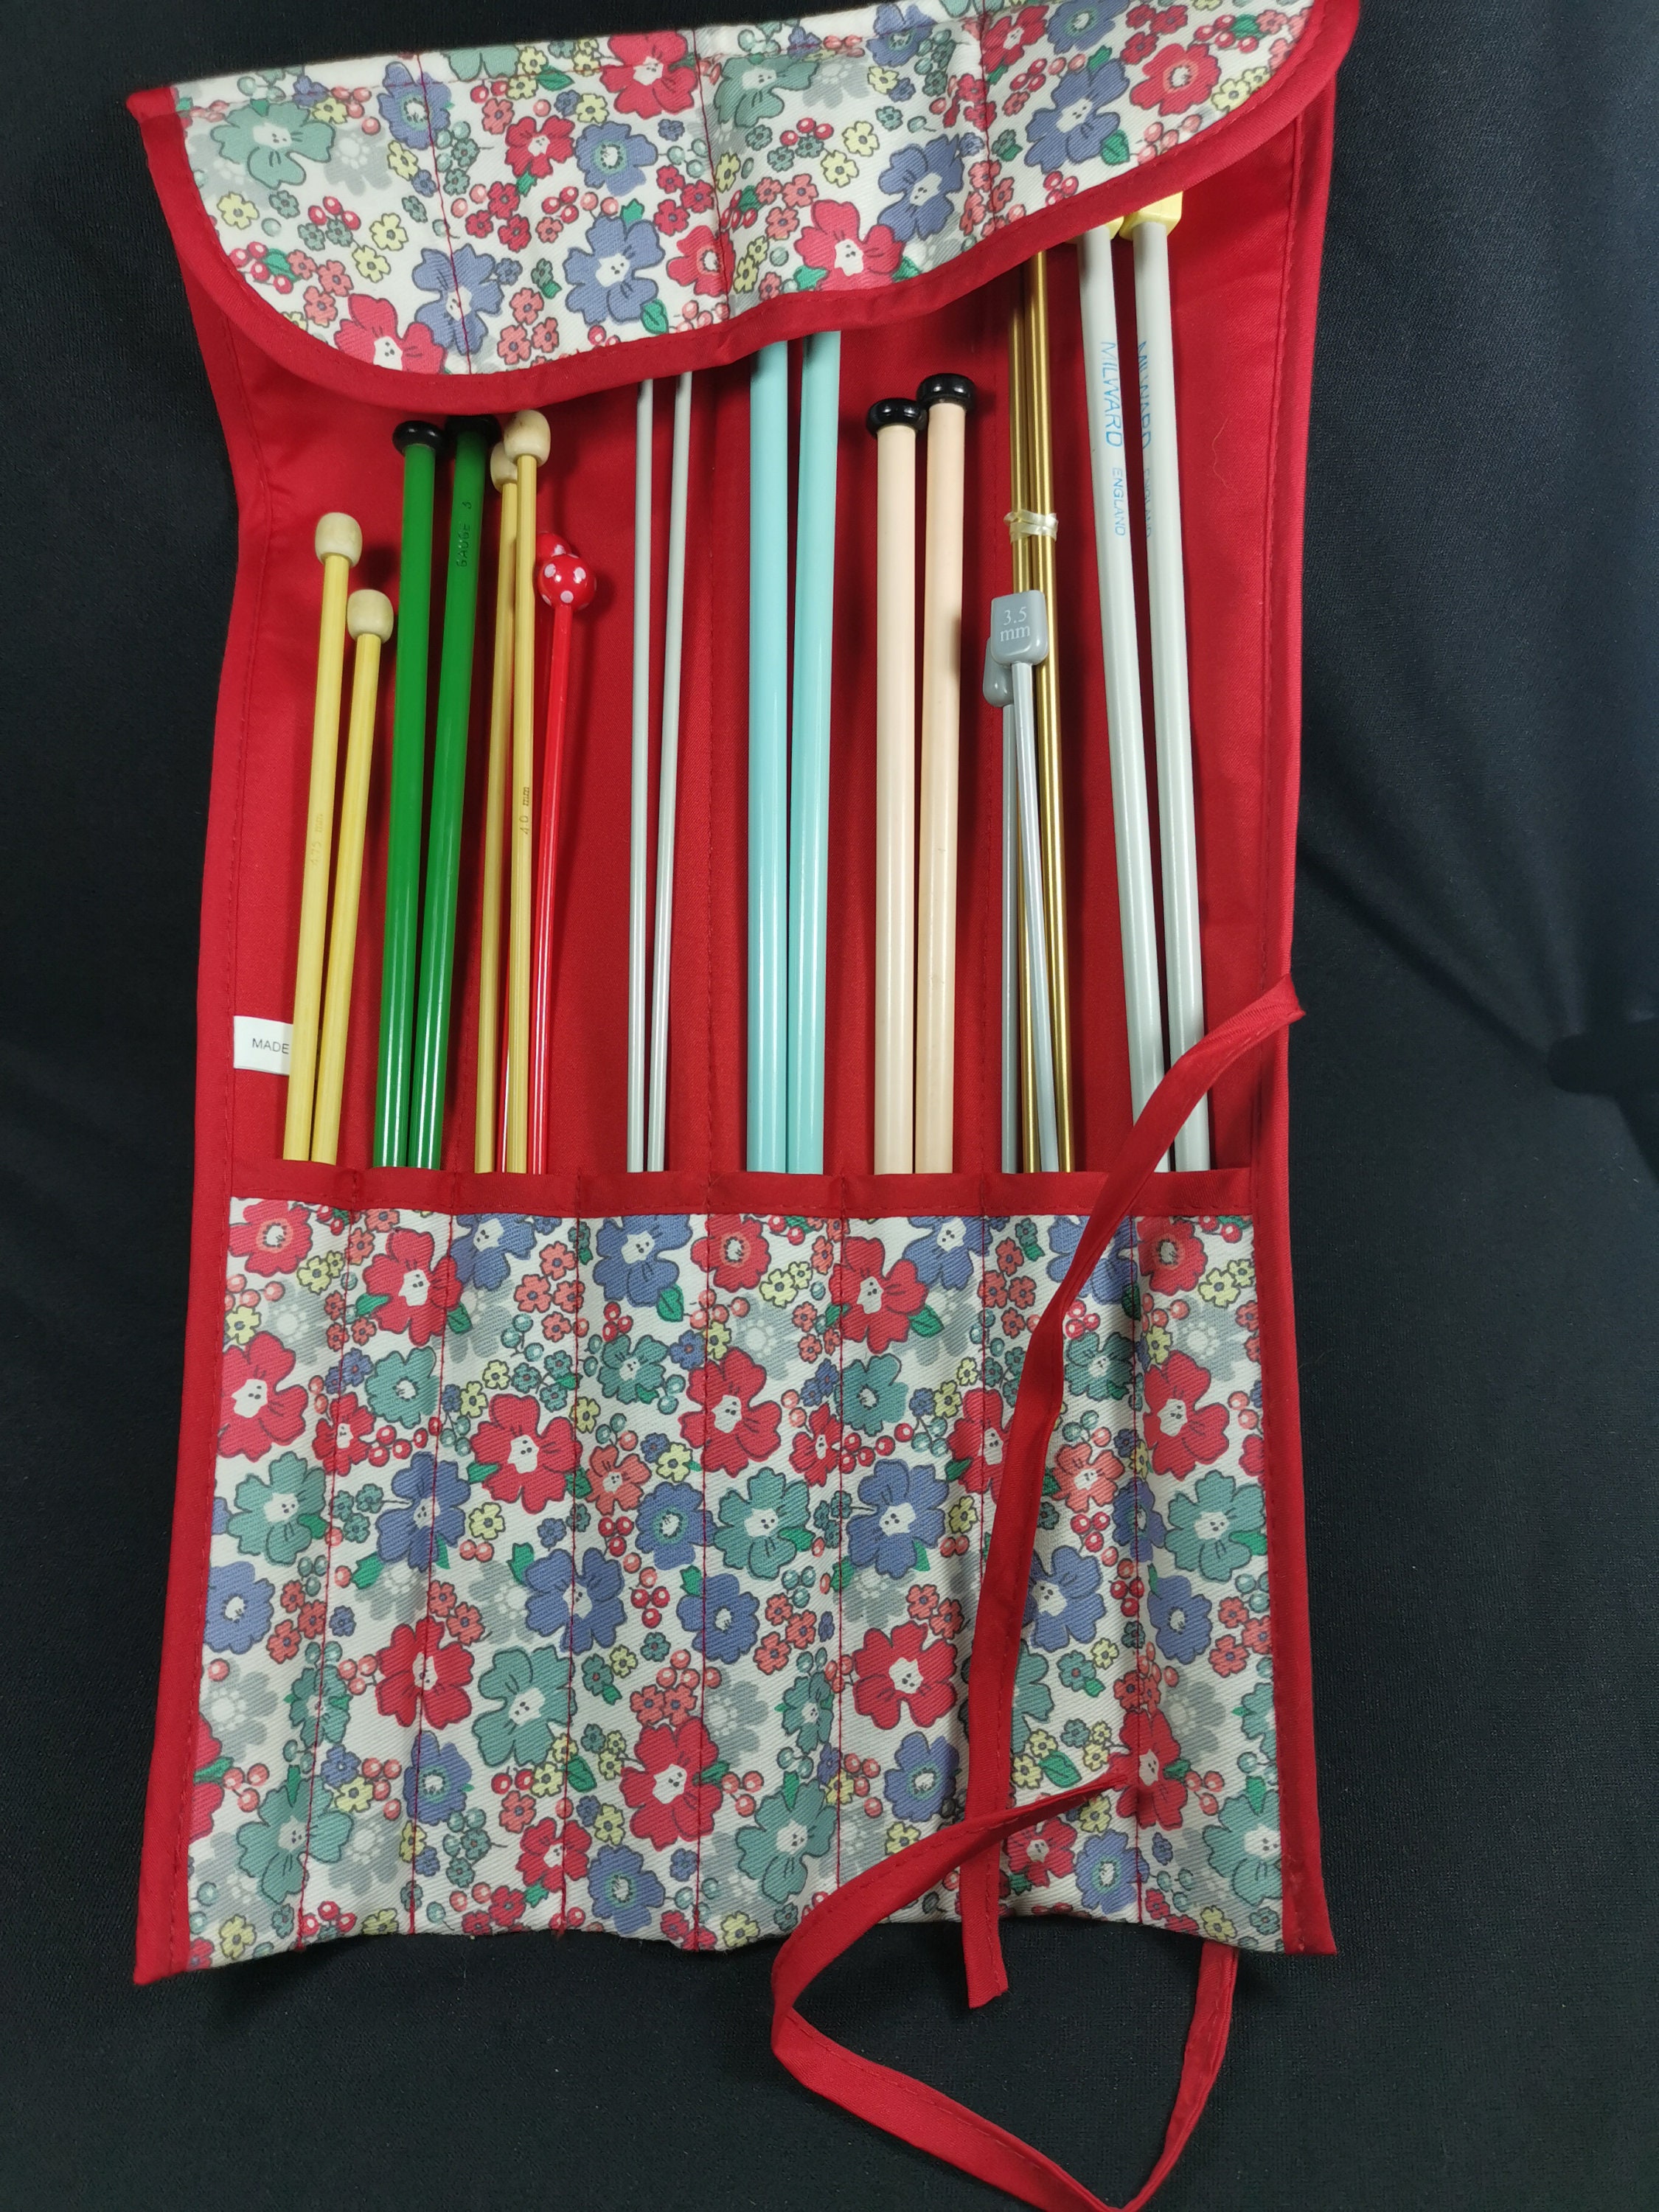 NEEDLEMASTER Interchangeable Circular Knitting Needle Set. 13 Size Tips  From 2 to 15 Plus 4 Different Length Cables and 2 Connectors 